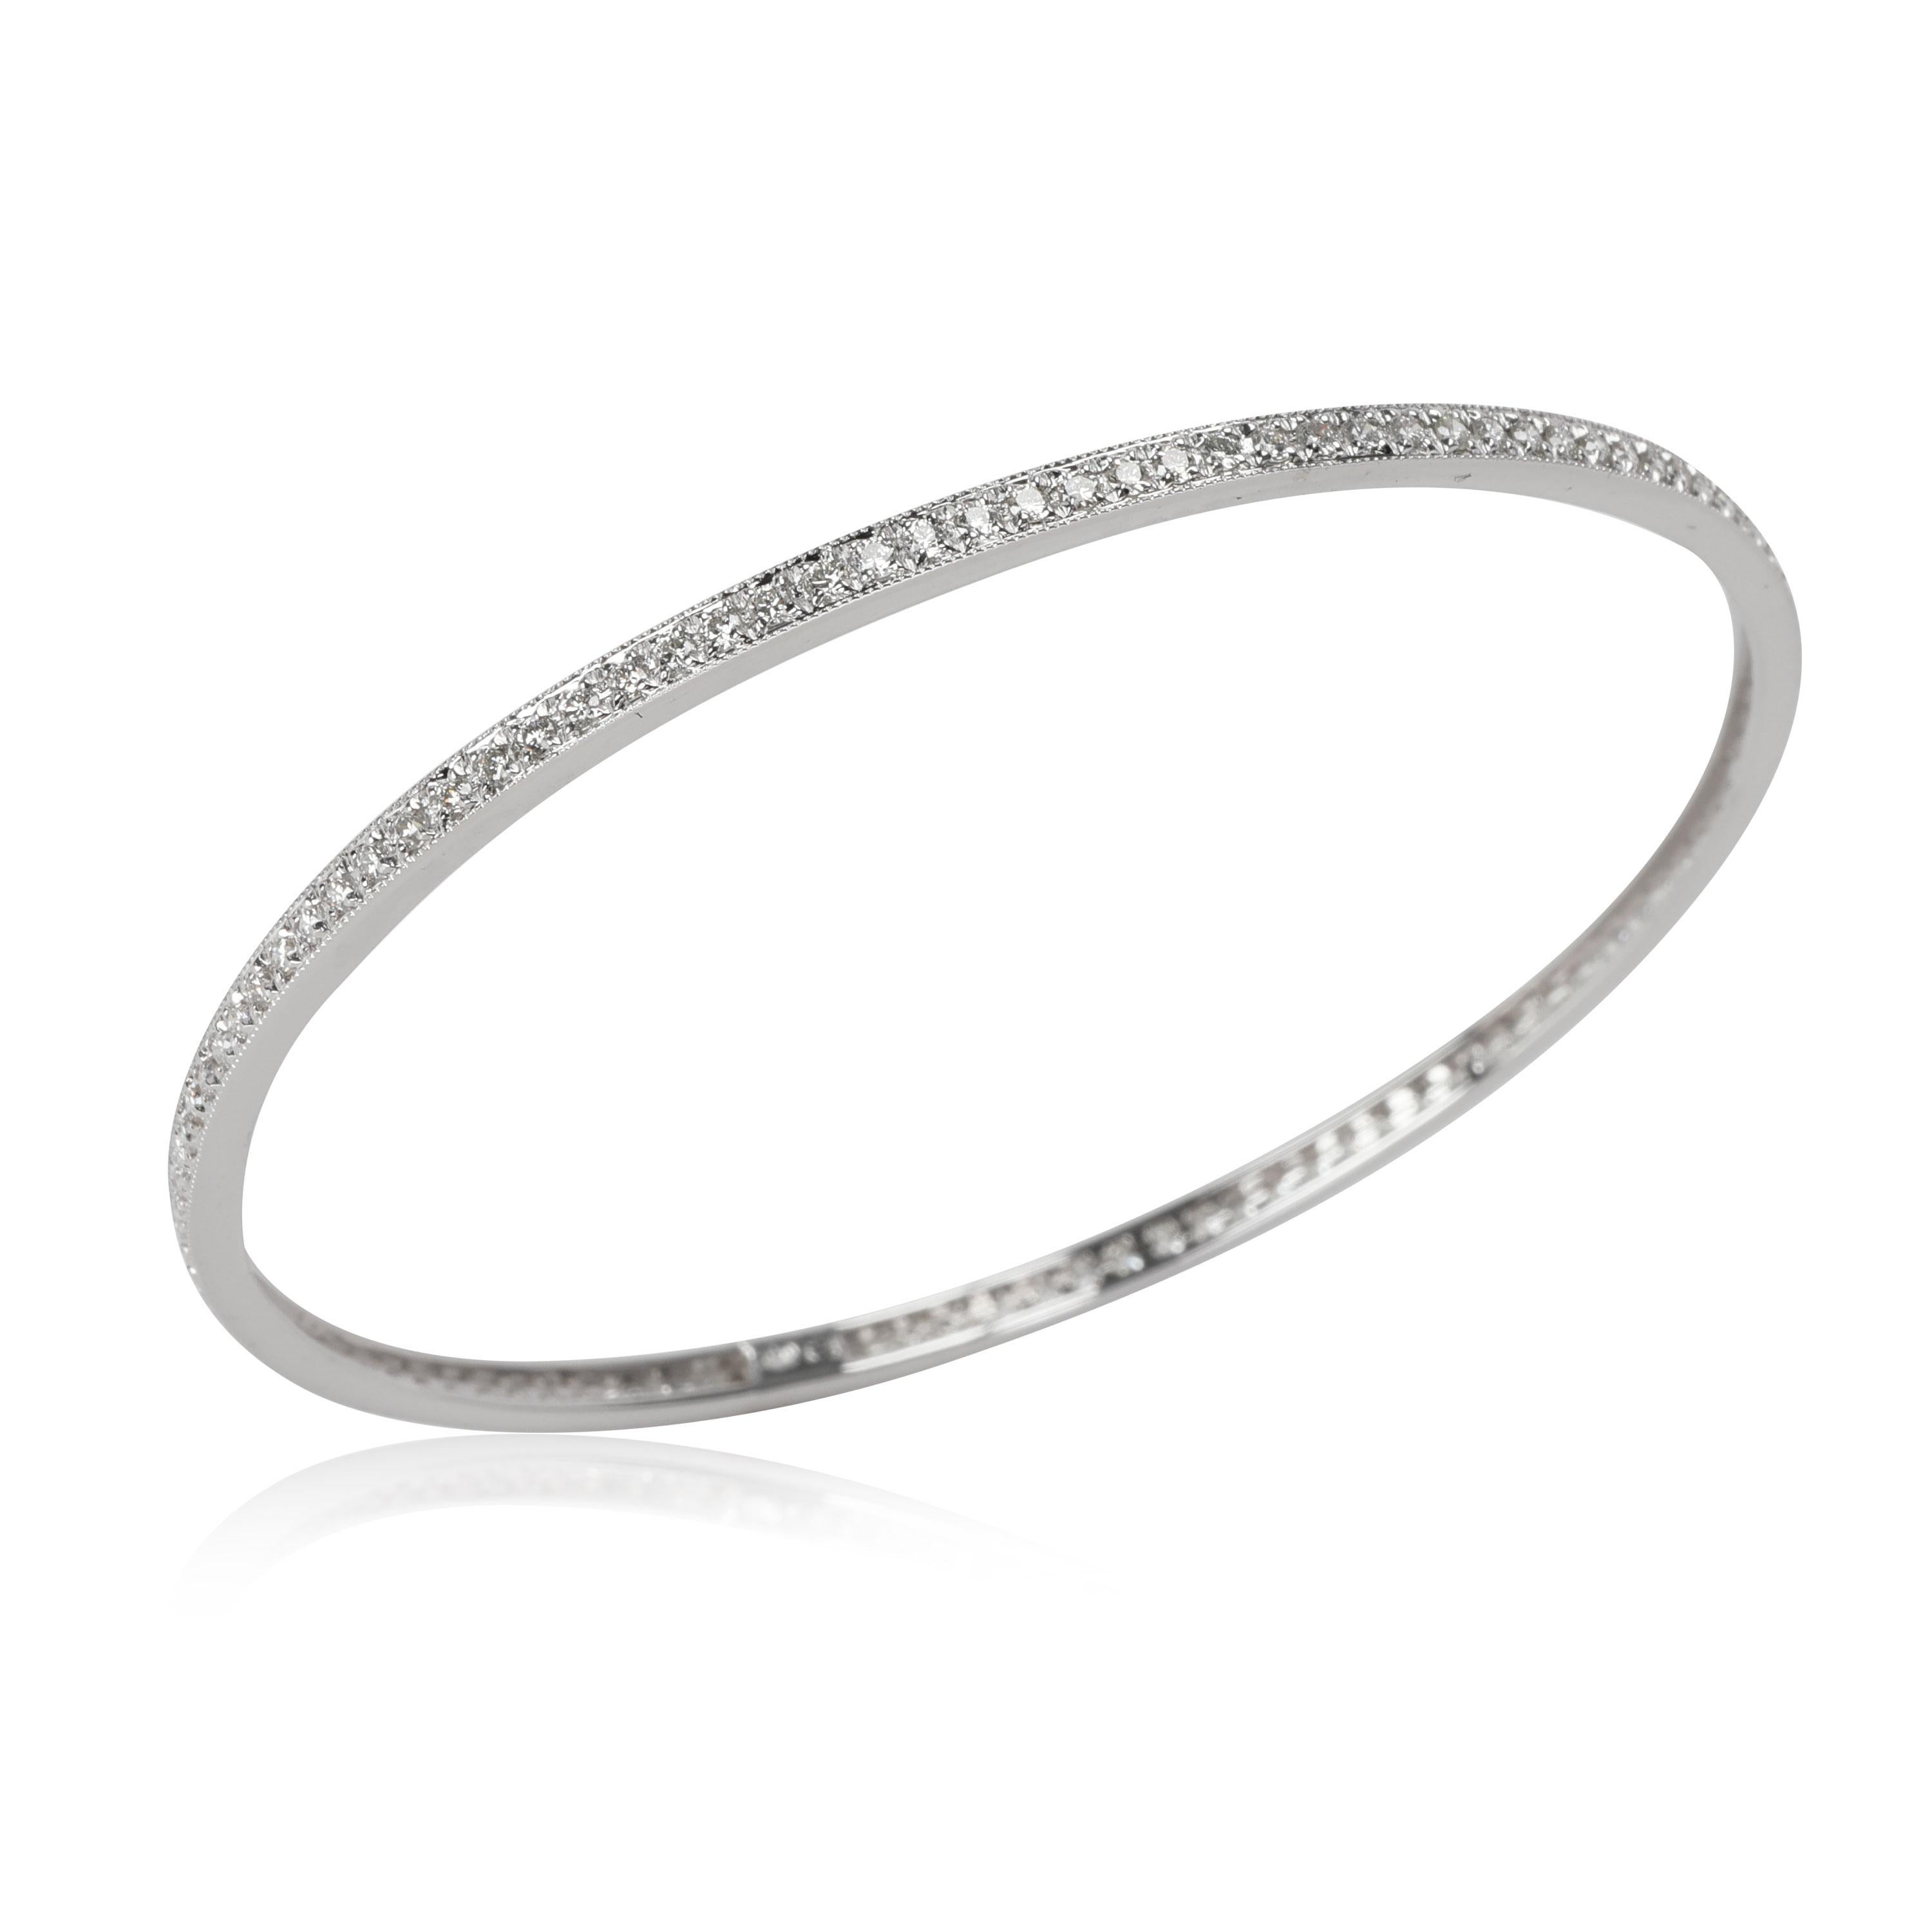 Diamond Slip On Bangle in 18k White Gold 1.75 CTW

PRIMARY DETAILS
SKU: 117276
Listing Title: Diamond Slip On Bangle in 18k White Gold 1.75 CTW
Condition Description: Retails for 2995 USD. In excellent condition and recently polished. Fits a 7.5